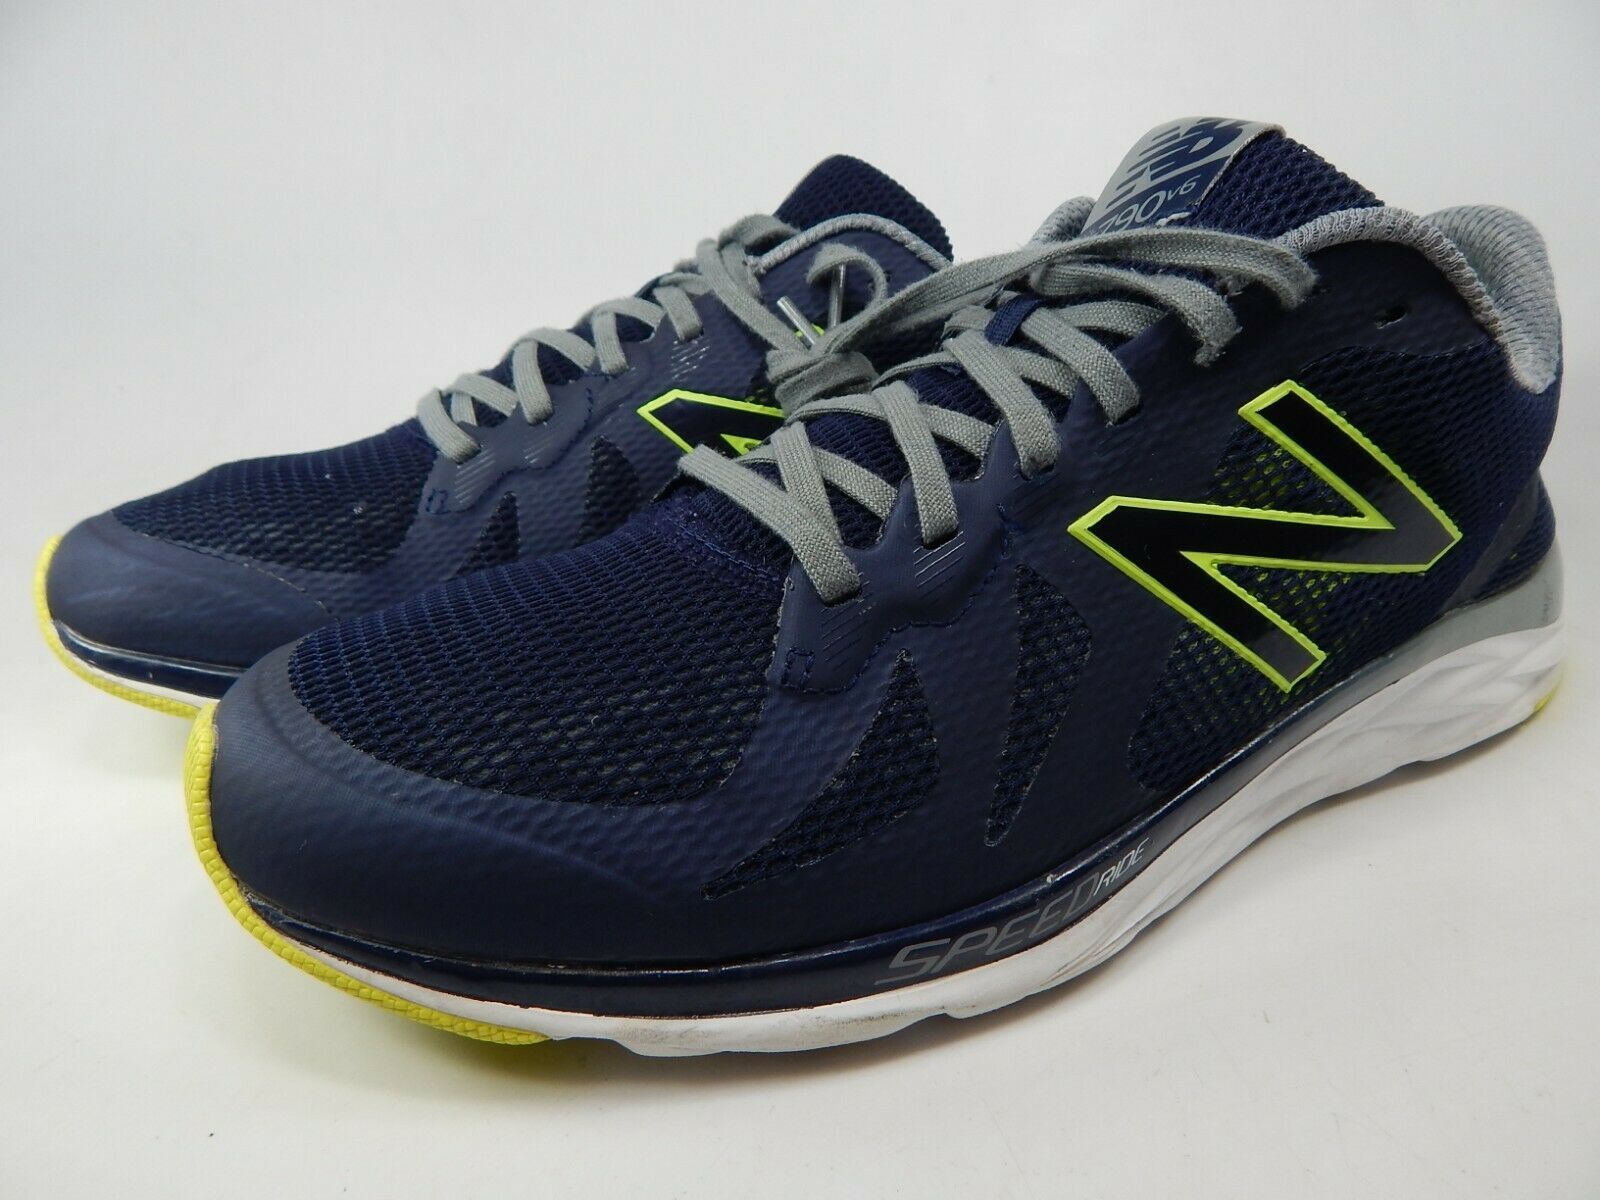 New balance 790 v6 Taille US 9.5 M (D) Eu 43 Homme Chaussures Course ...